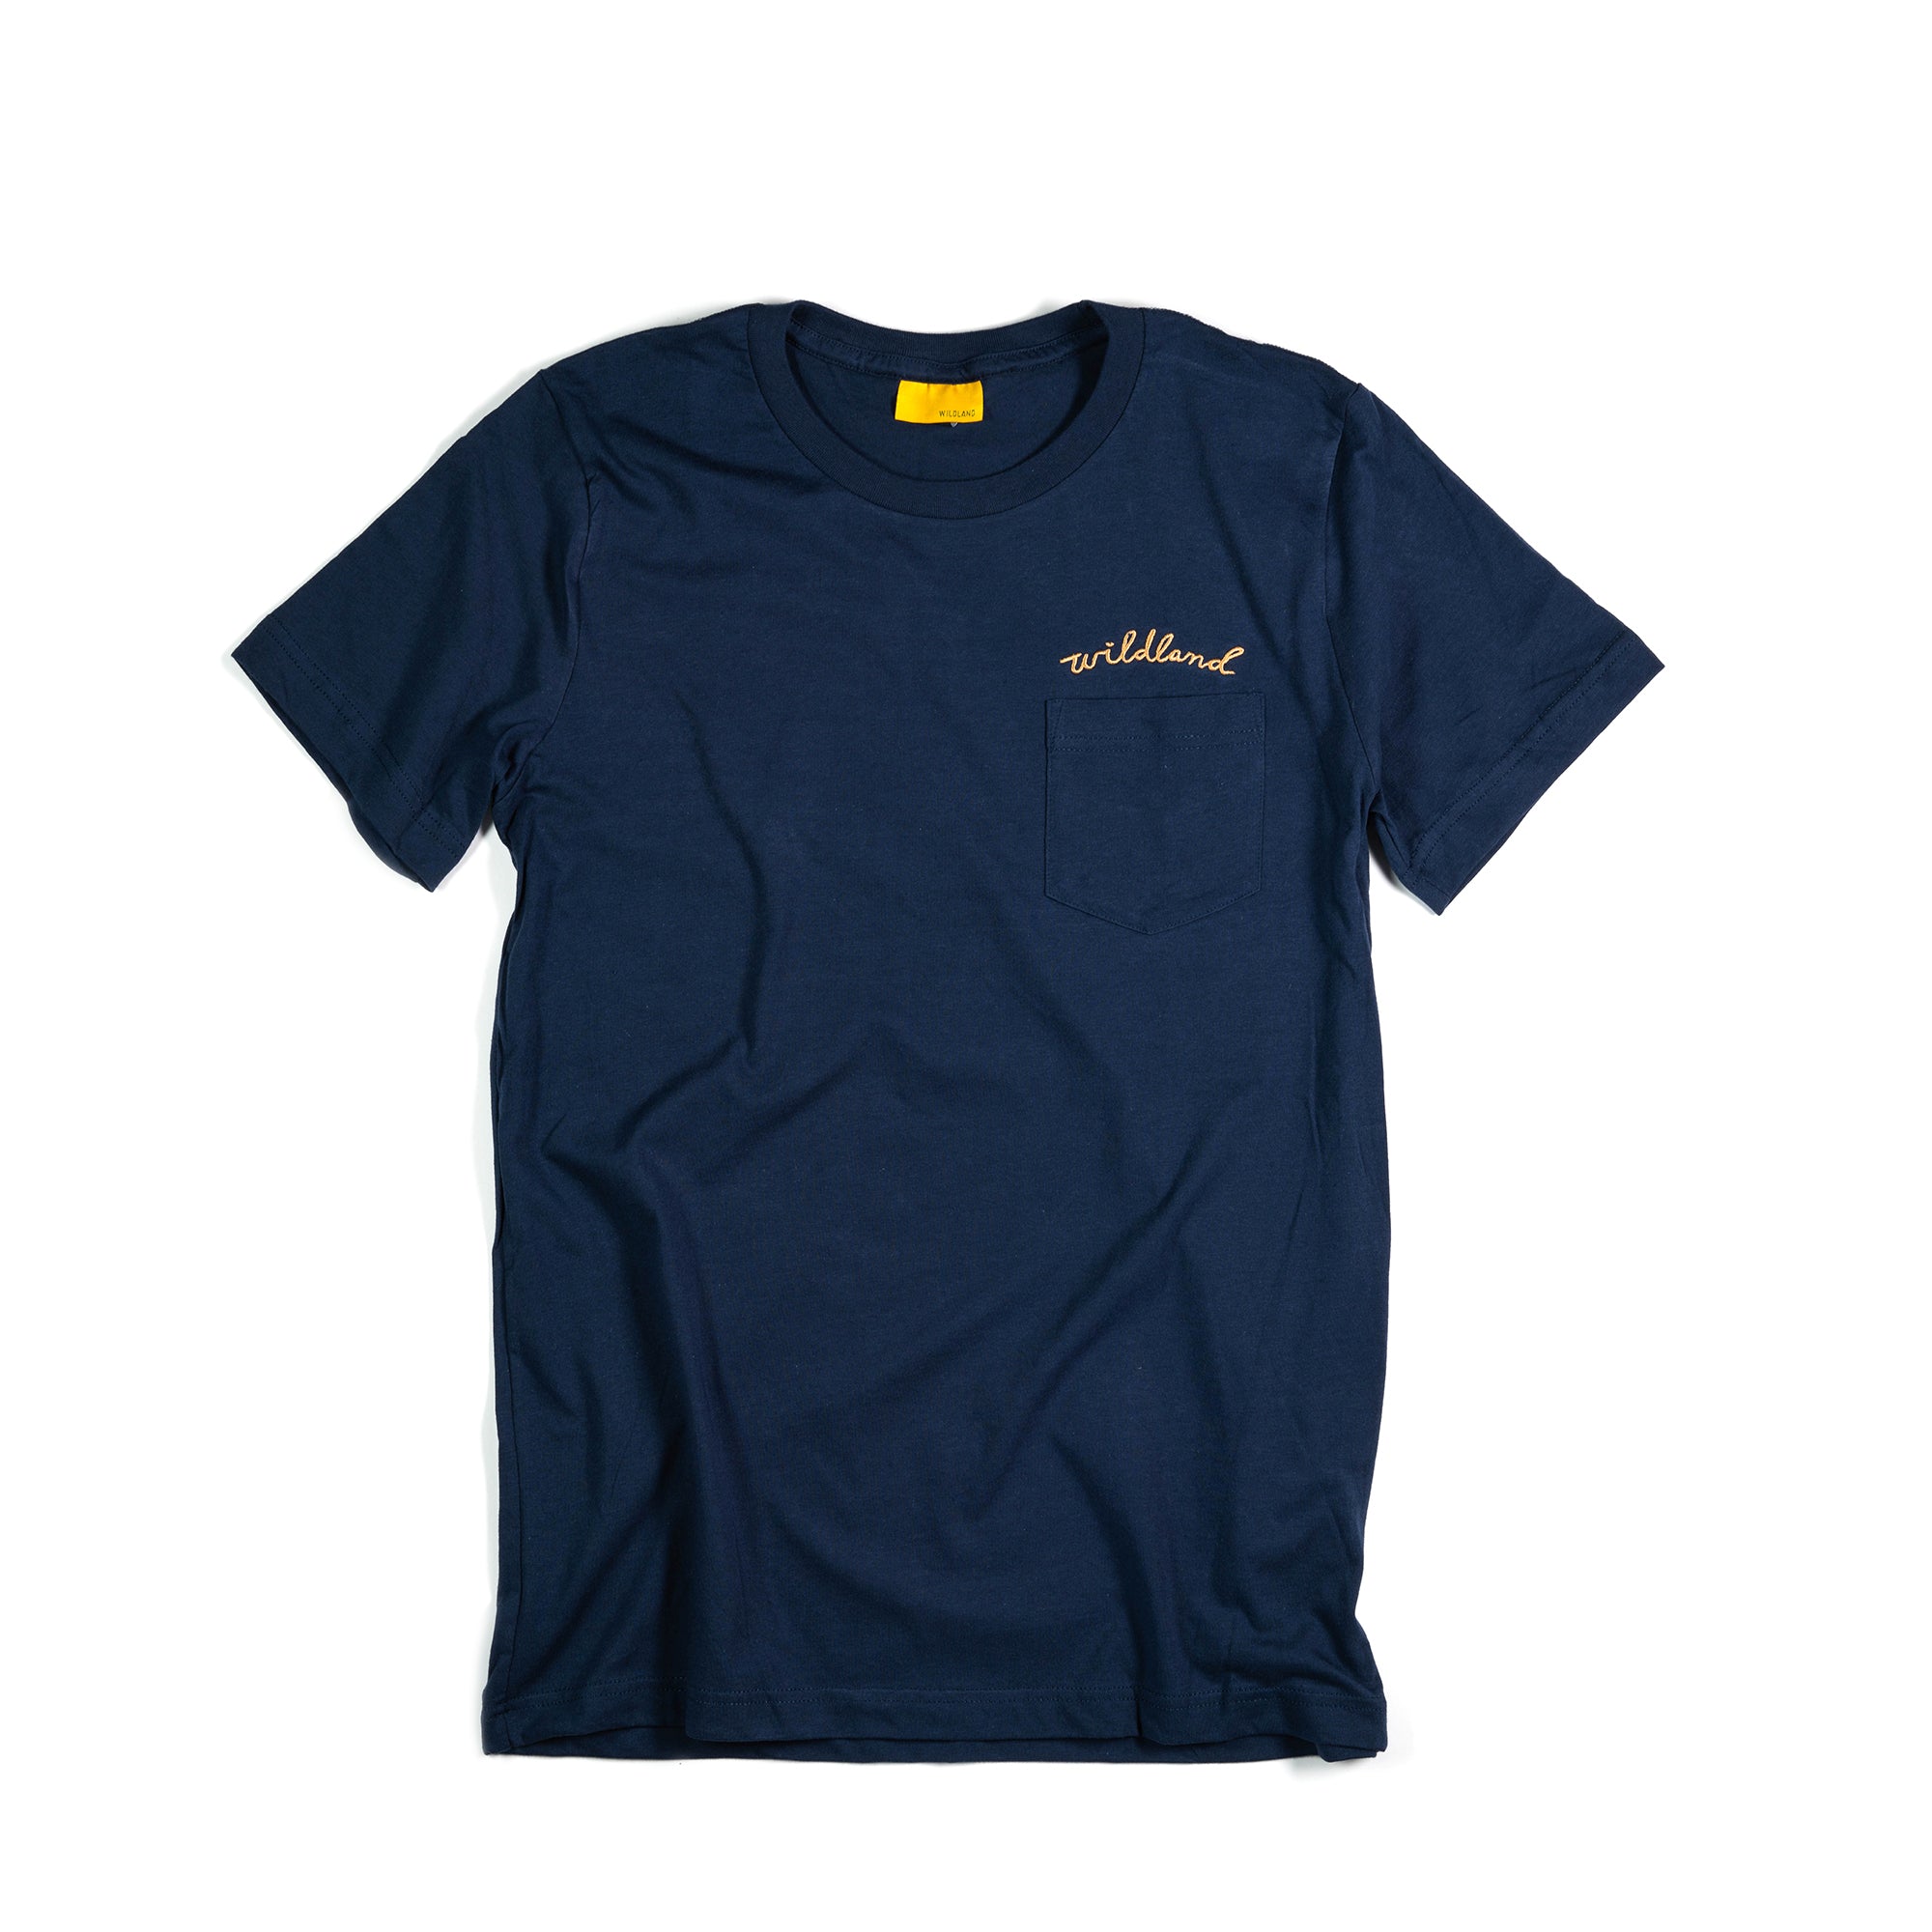 Navy Embroidered Pocket Tee